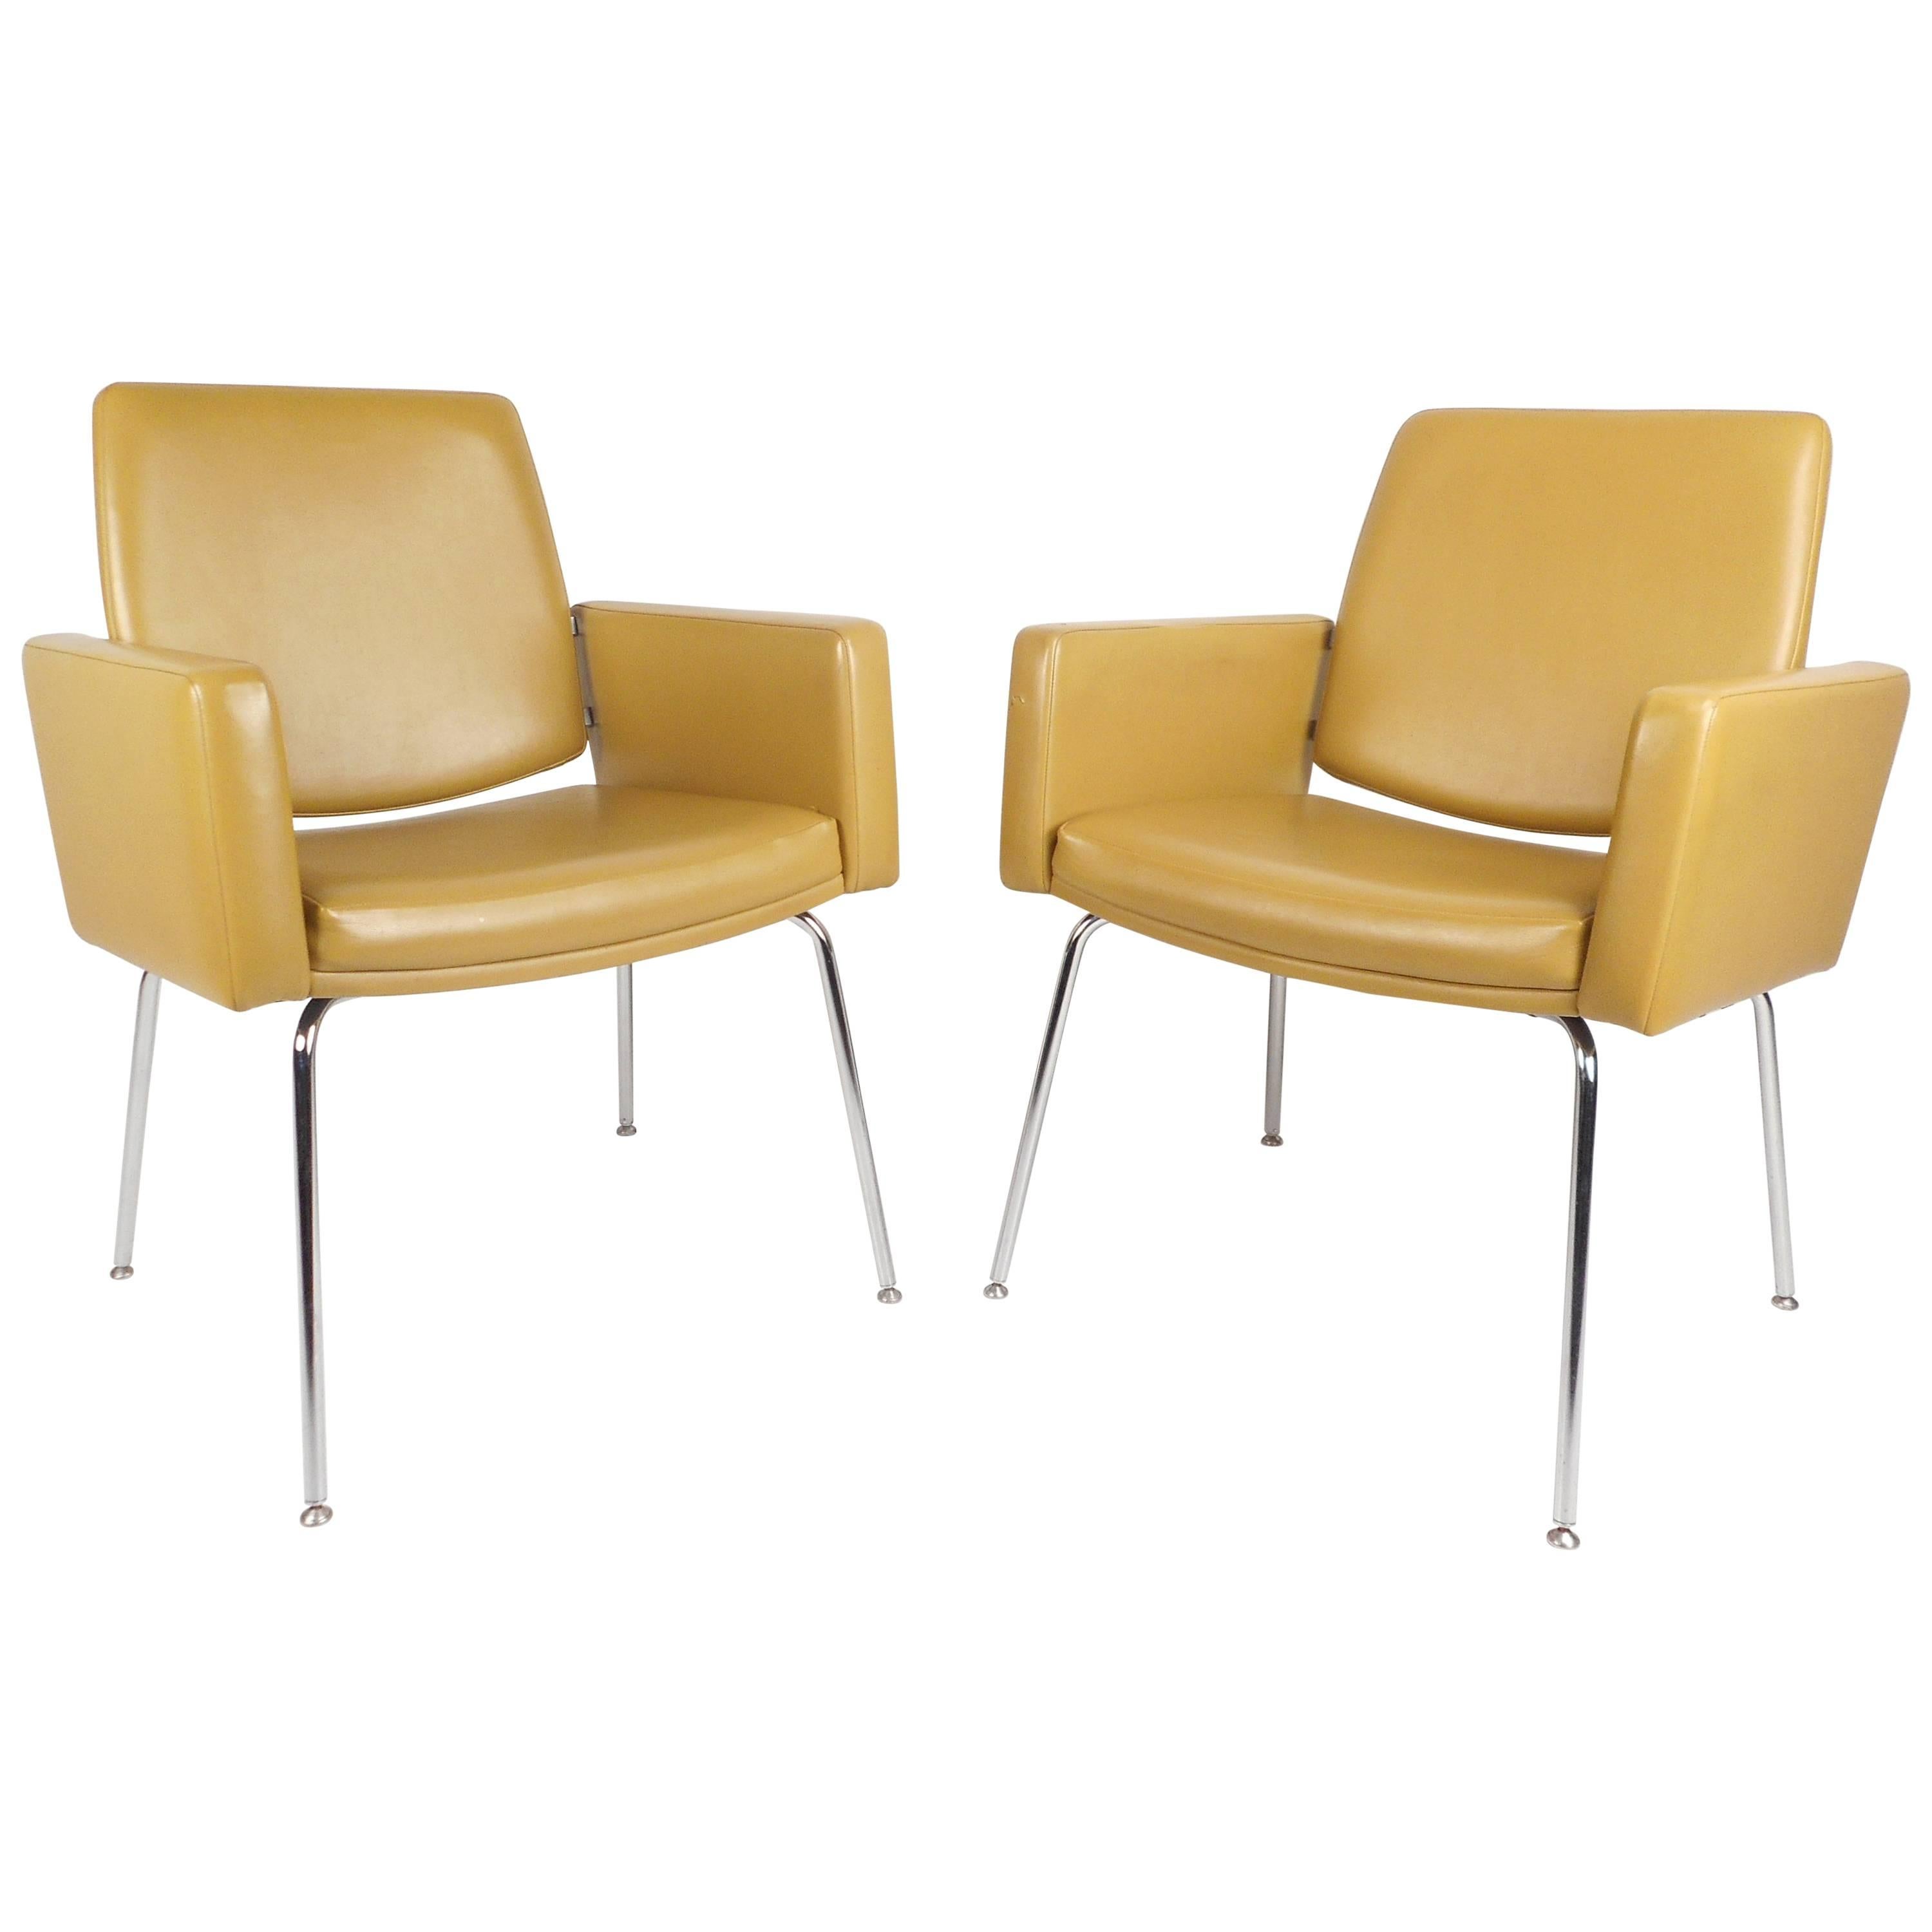 Mid-Century Modern Lounge Chairs by J.G. Furniture Company